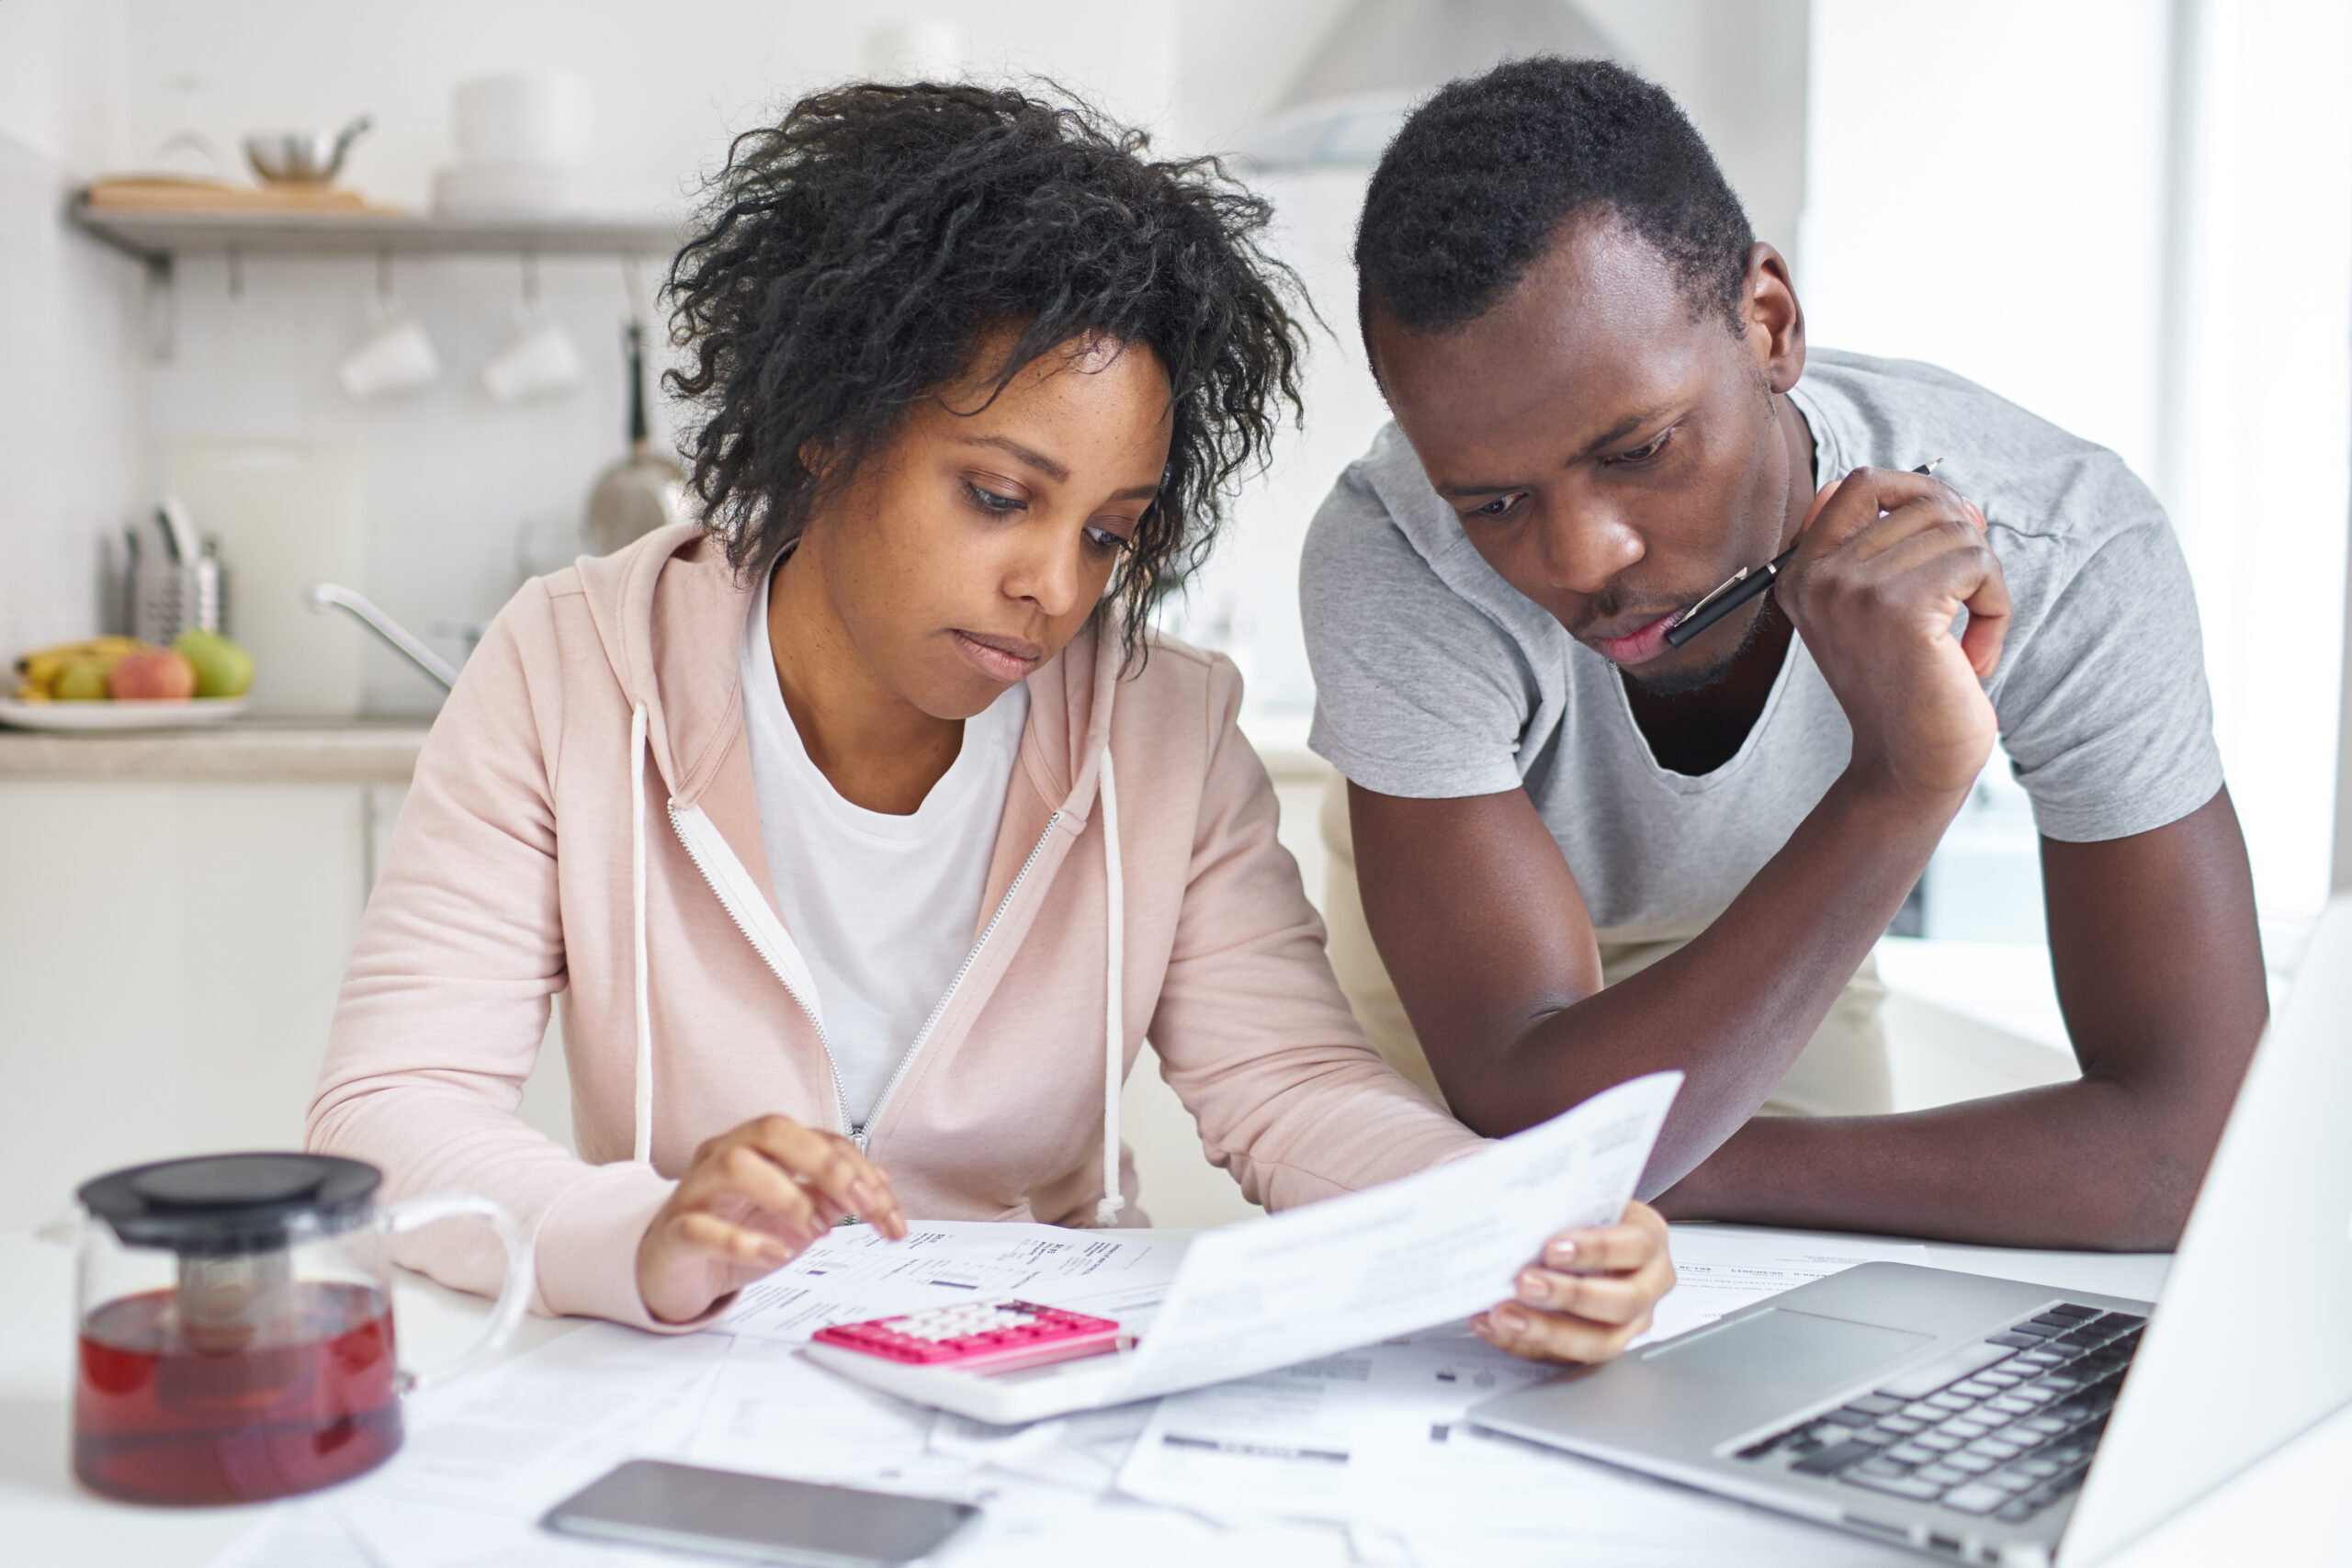 Man and woman looking at a financial document and calculating their budget at the kitchen table.